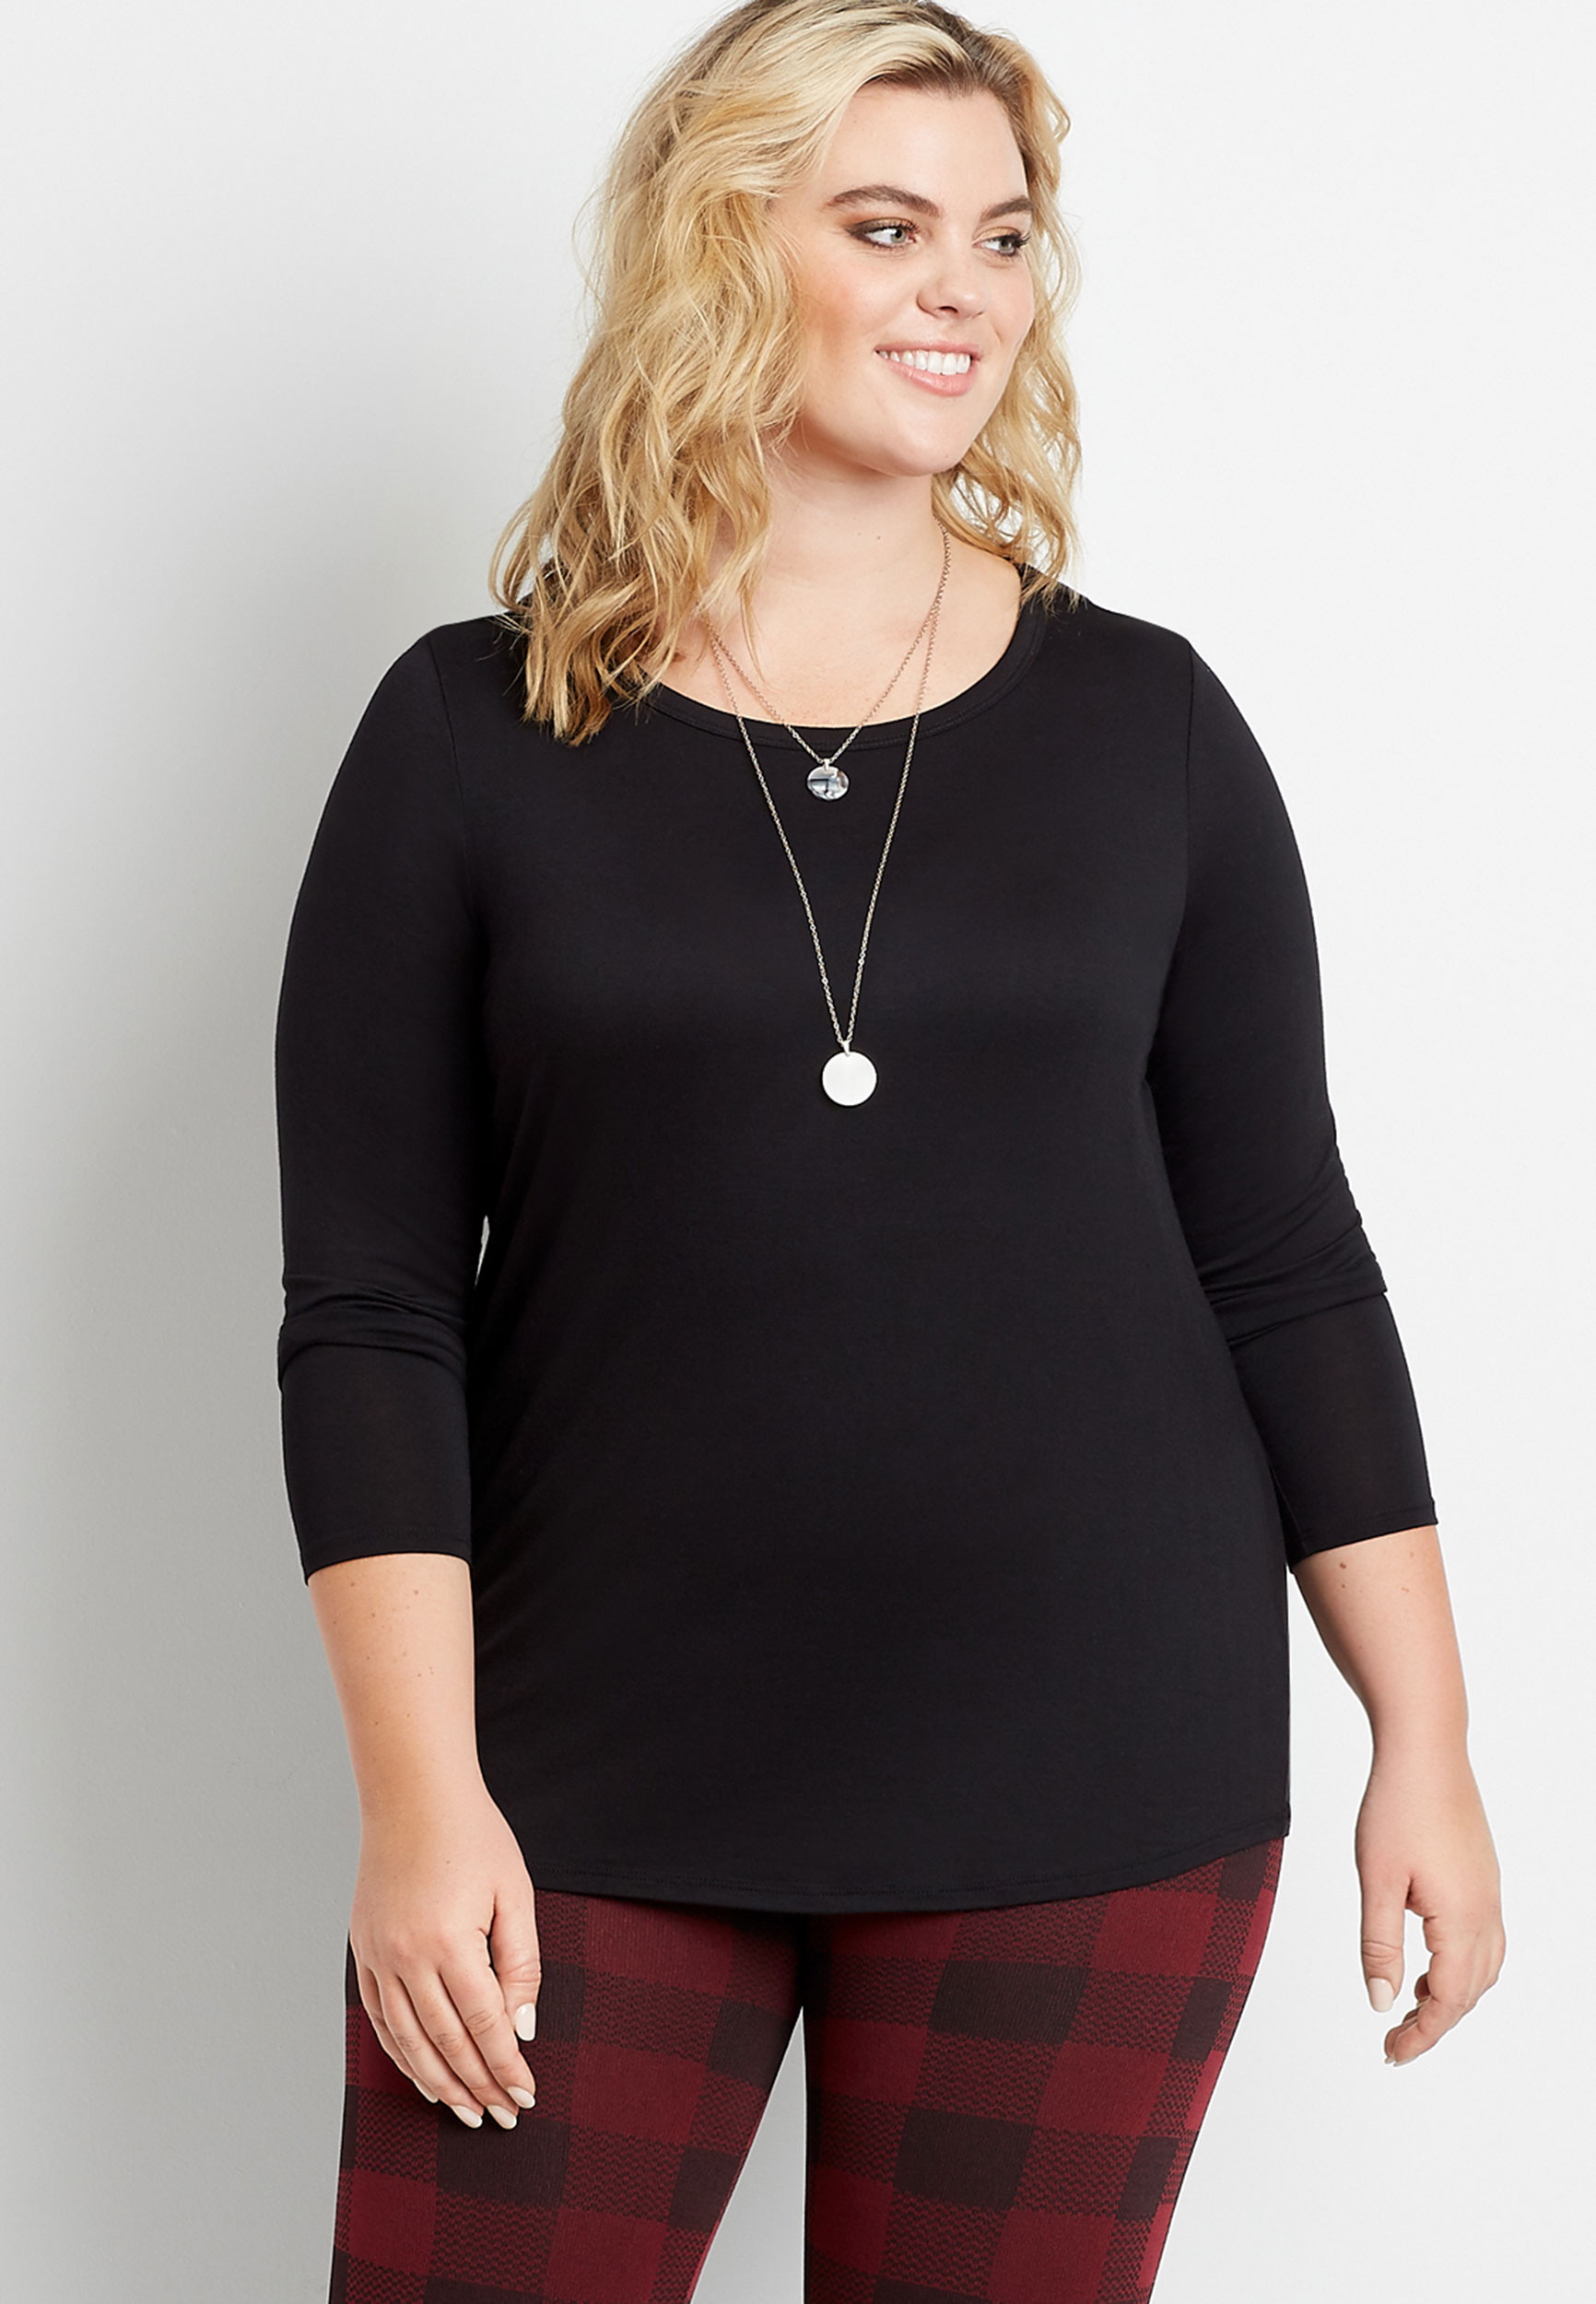 Plus Size 24/7 Solid Long Sleeve Tee | maurices